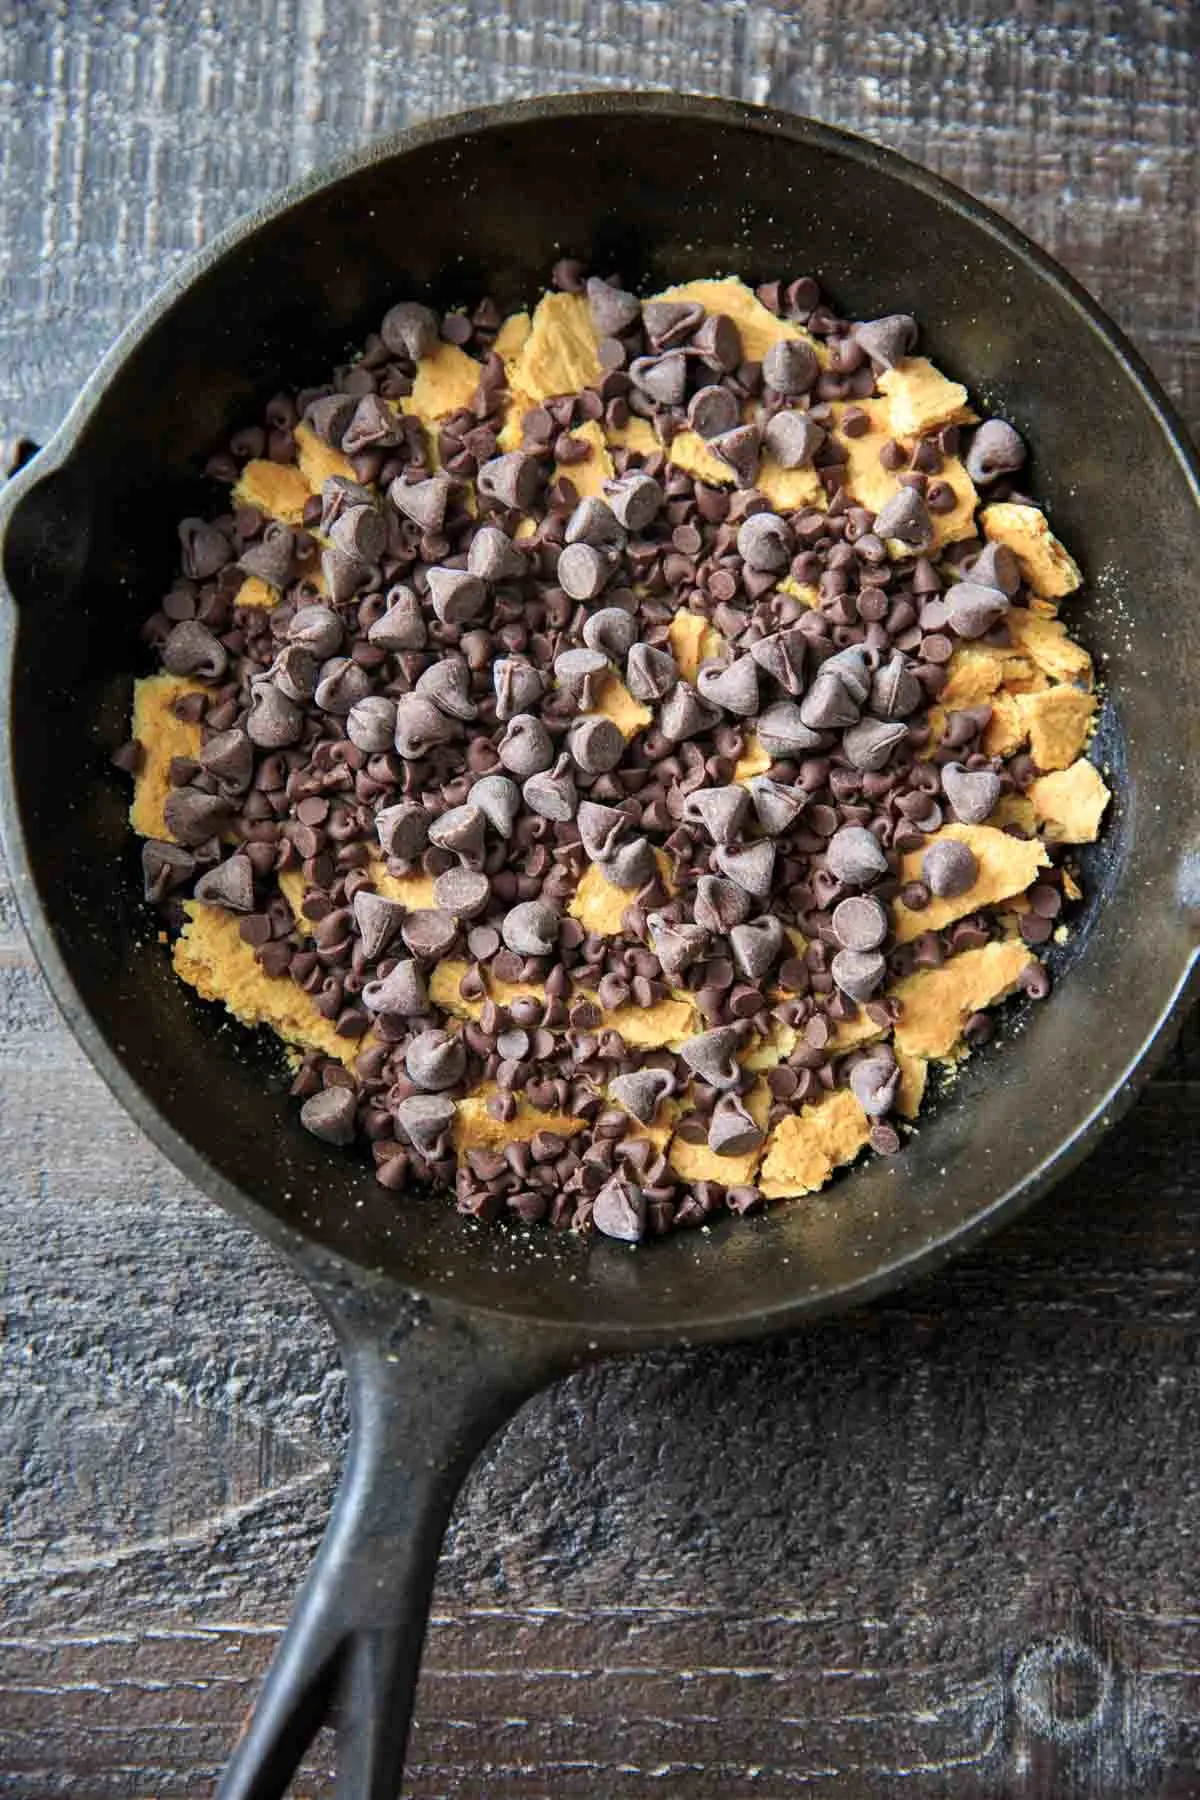 Crumbled graham crackers and chocolate chips ( regular and mini chips) in a cast iron pan